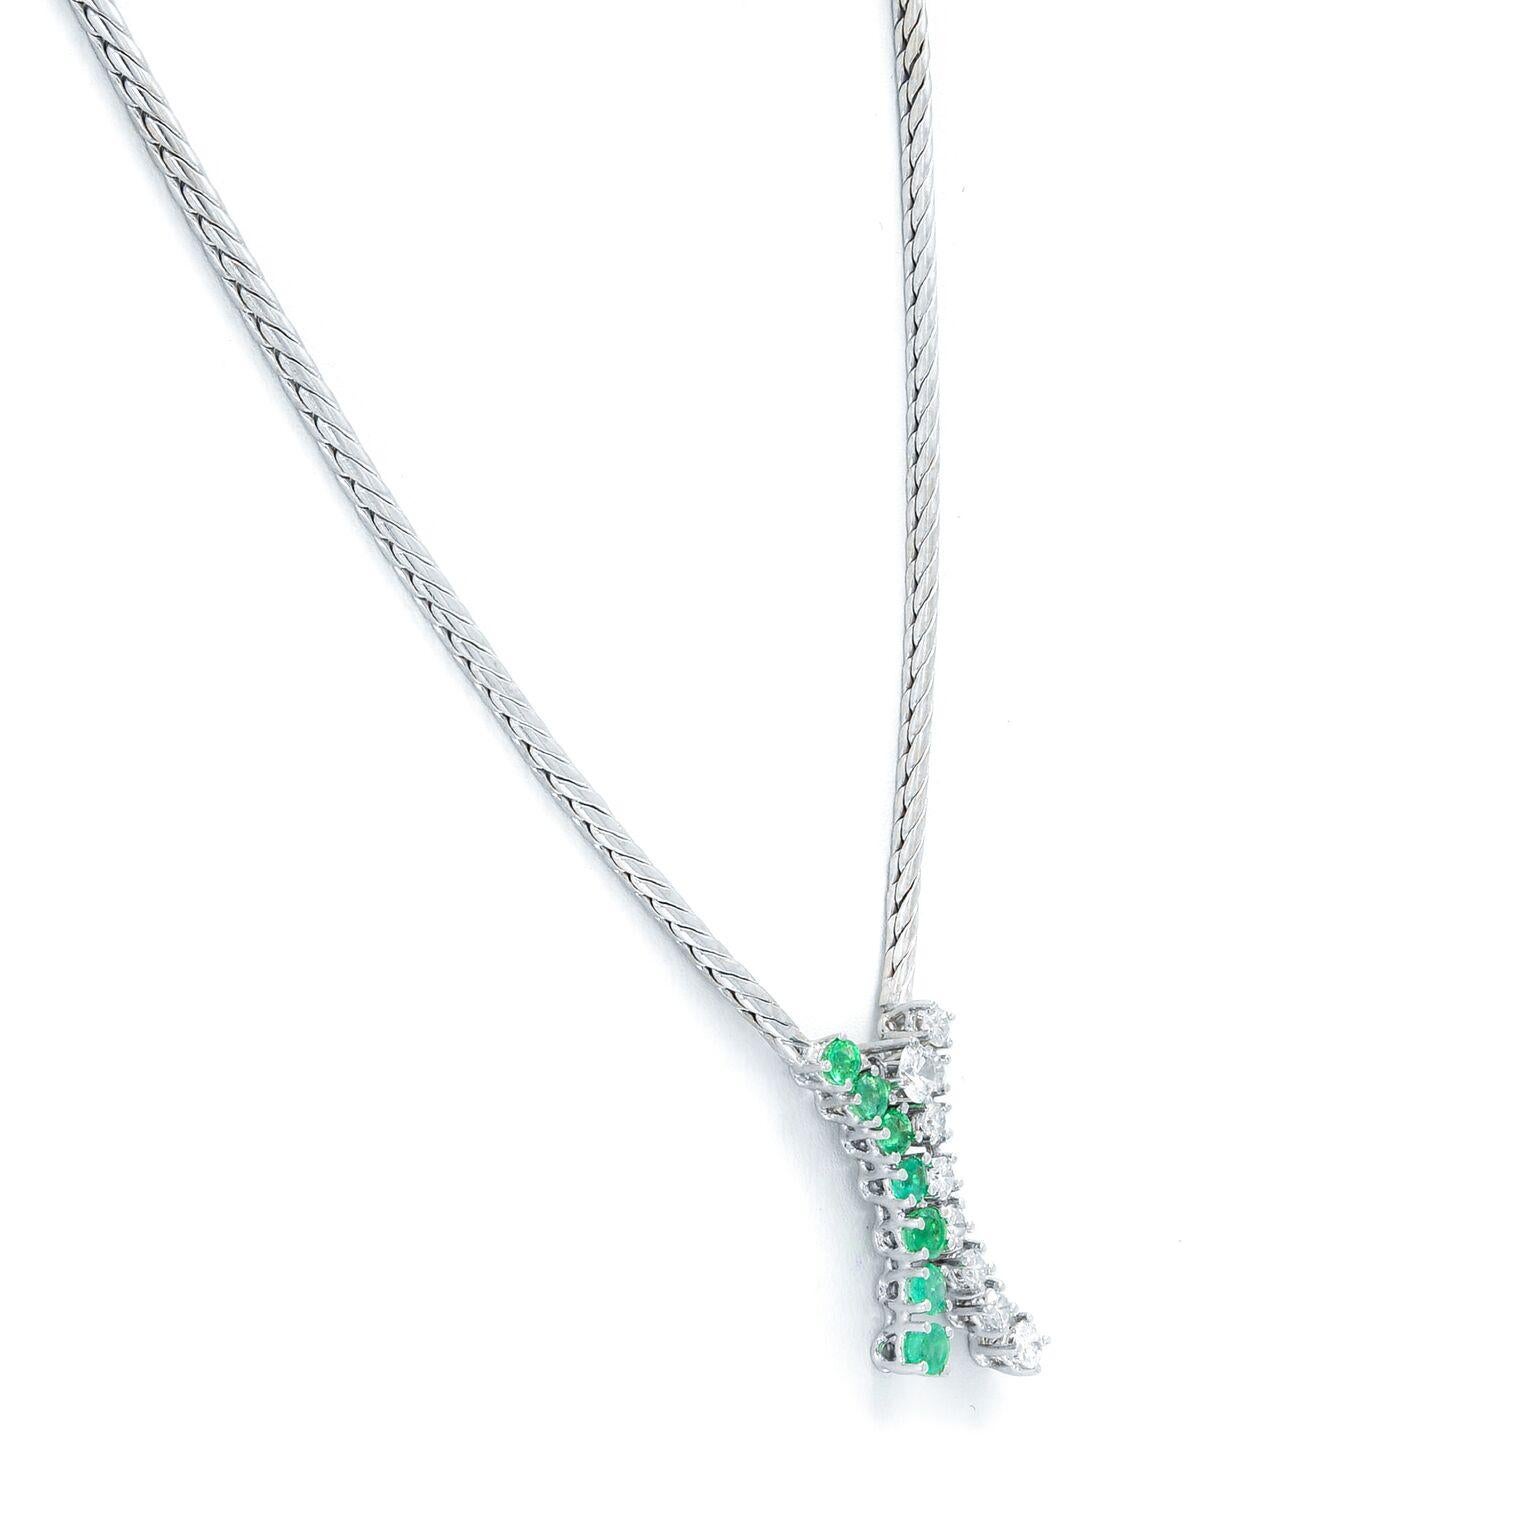 Rachel Koen Emerald Diamond Necklace 14K White Gold 0.20cttw In New Condition For Sale In New York, NY